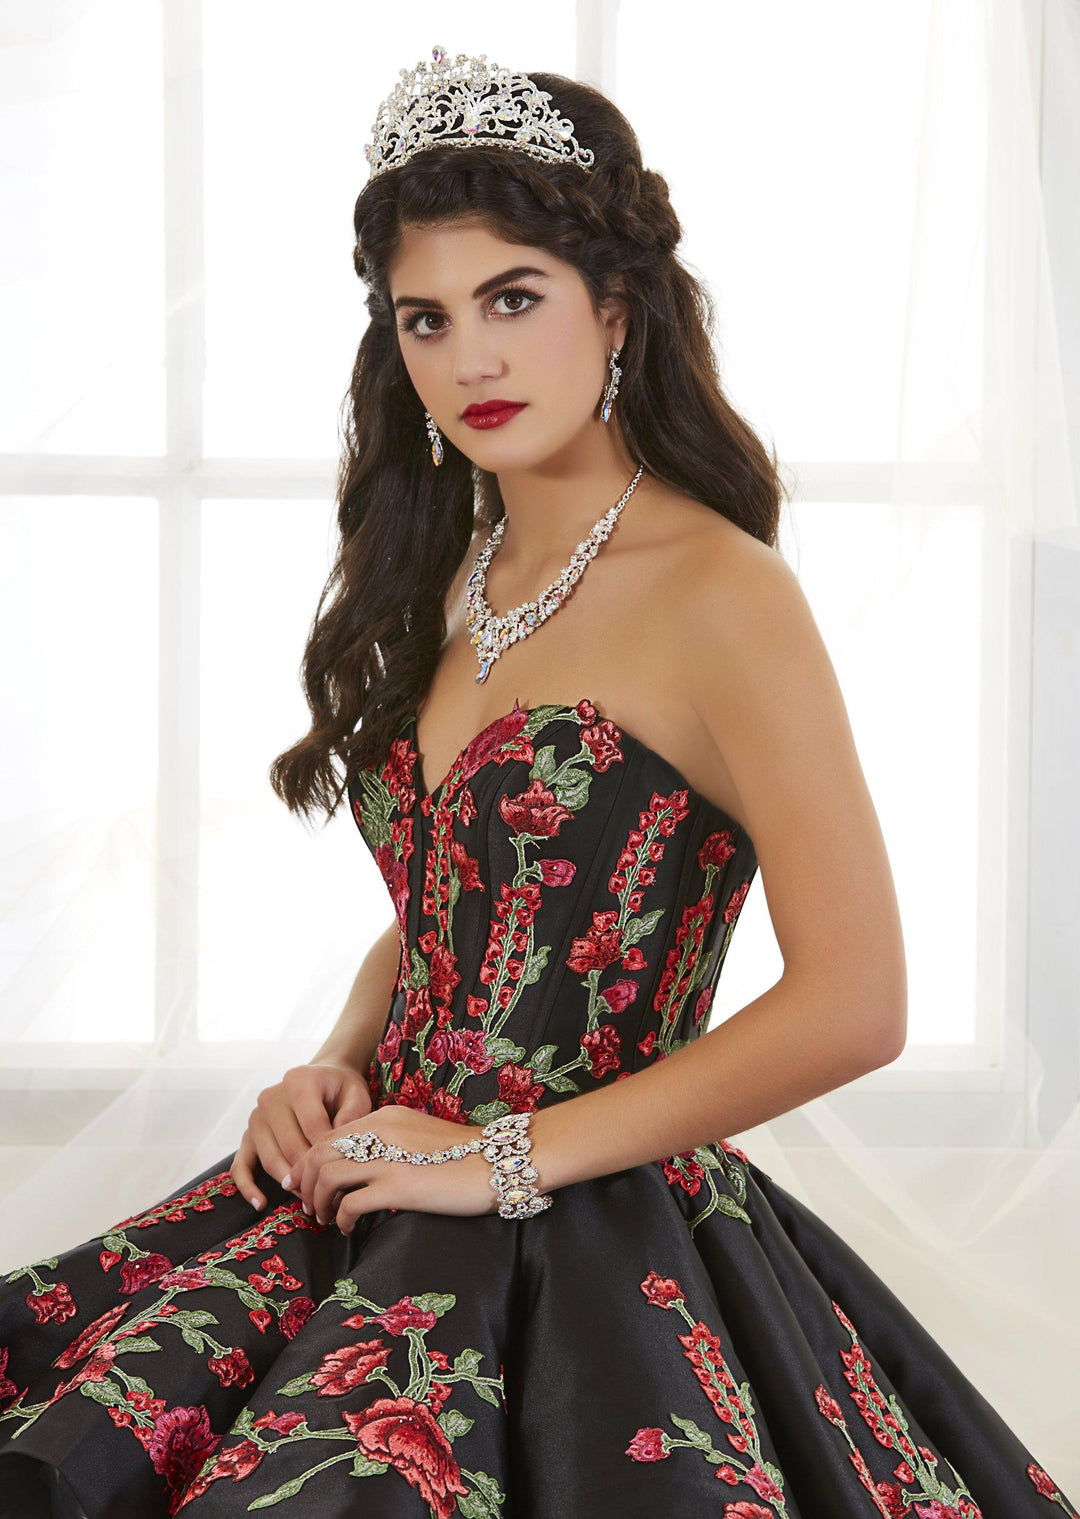 Rose Charro Quinceanera Dress by House of Wu 26892-Quinceanera Dresses-ABC Fashion